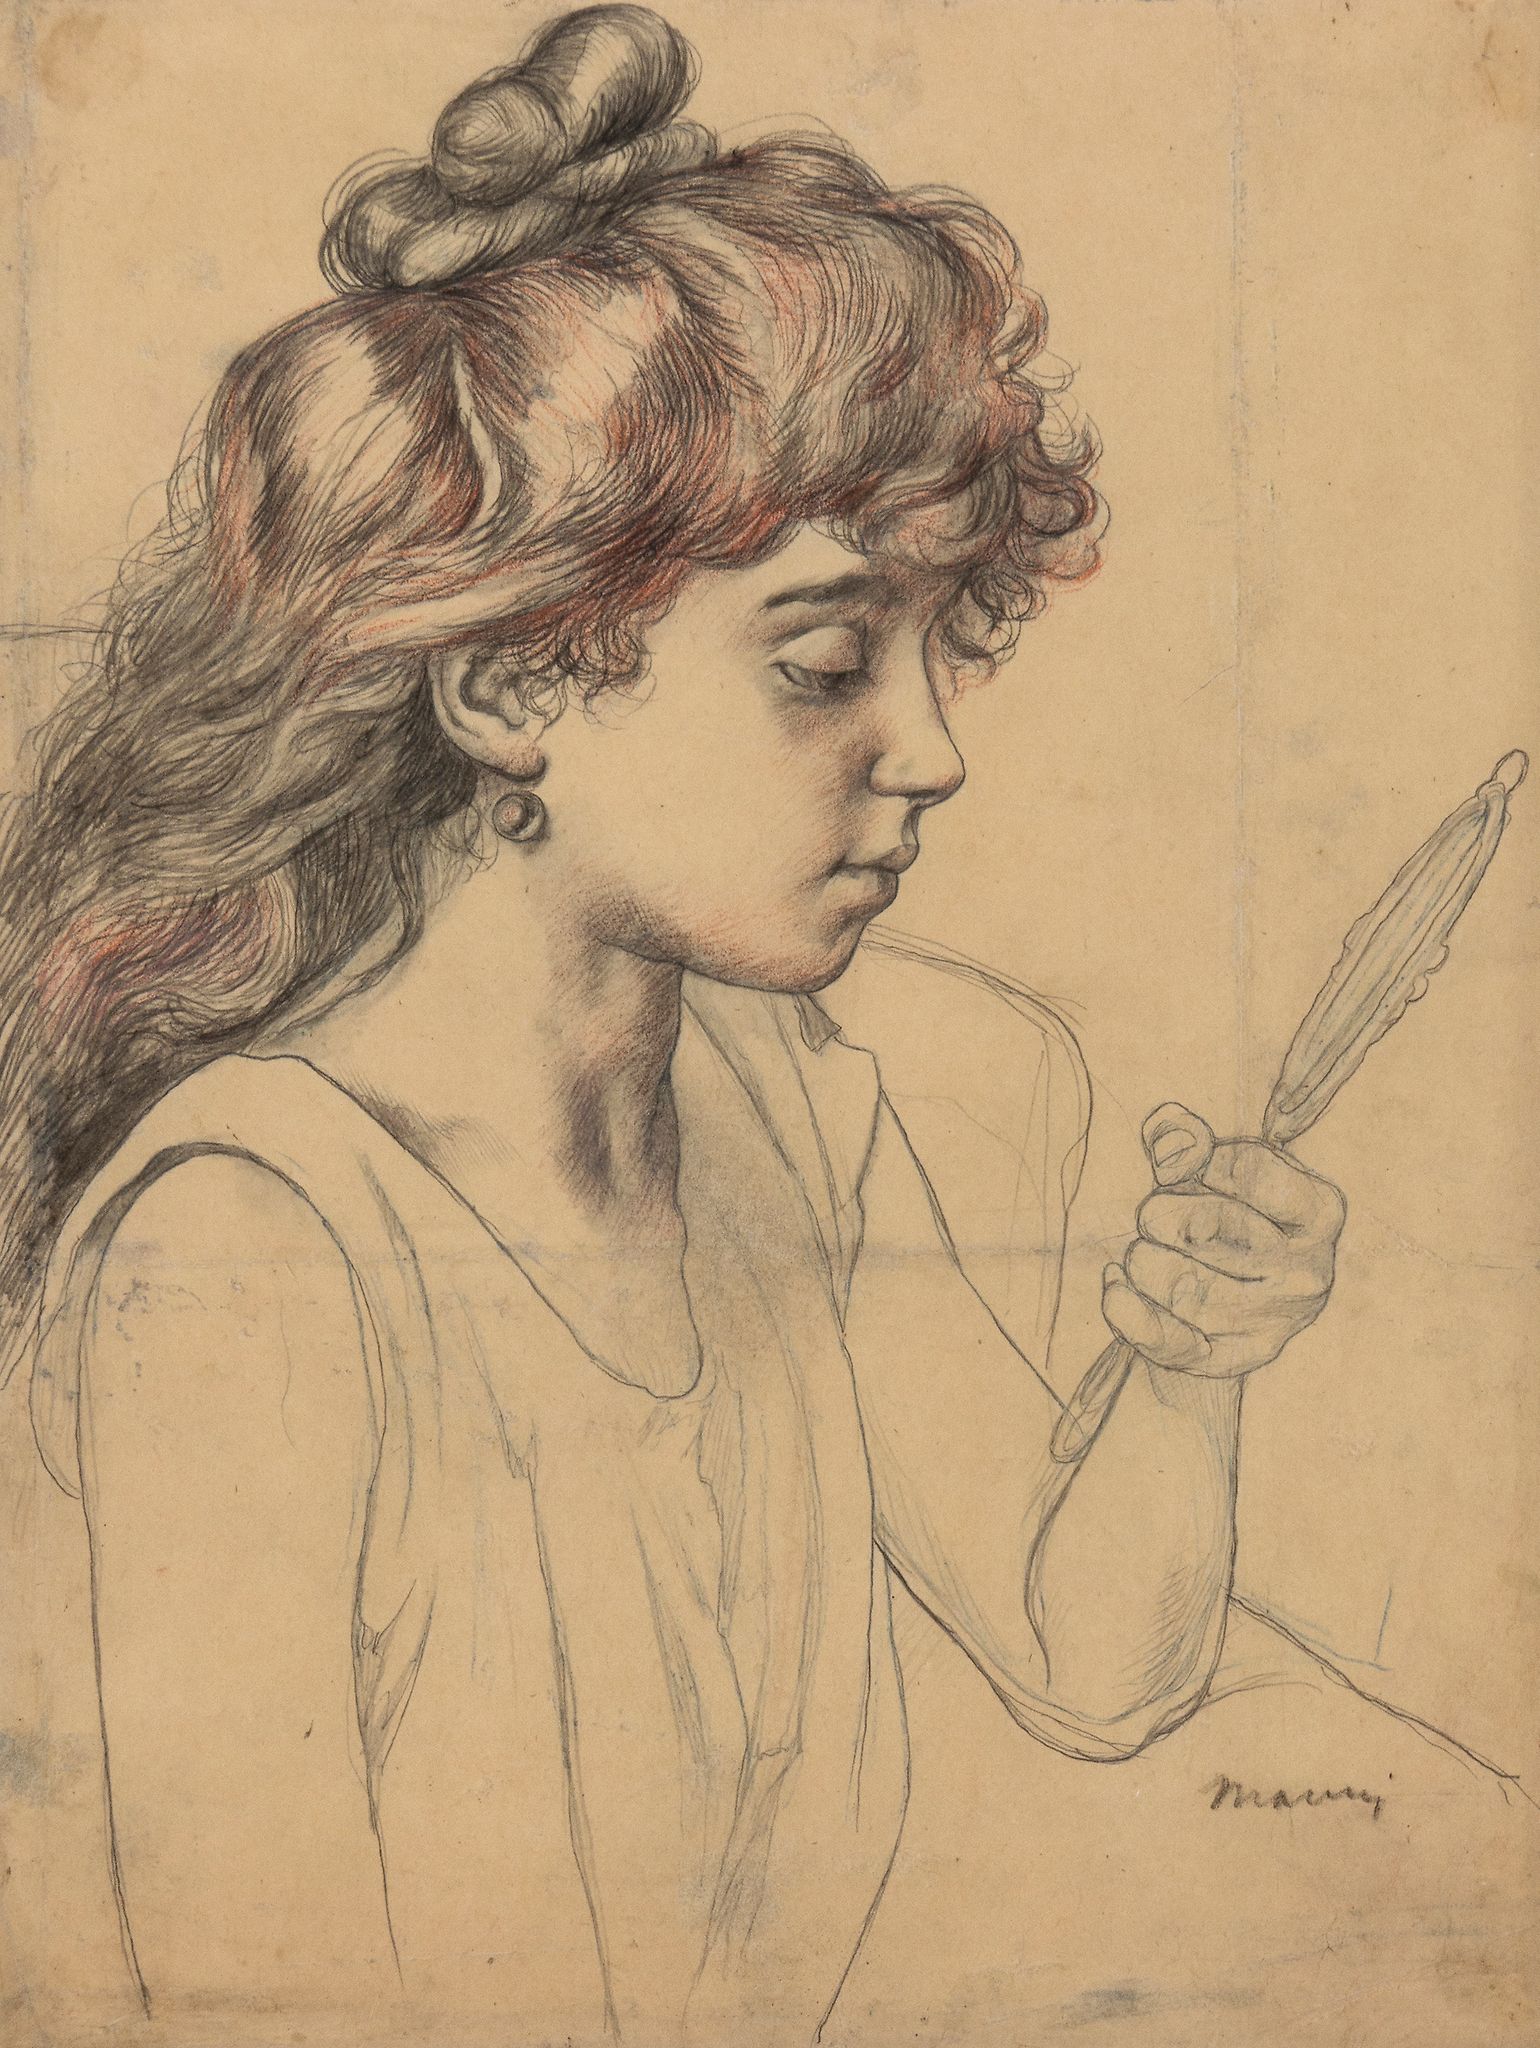 Charles Maurin (1856-1914) - Portrait de Mademoiselle Debray Graphite, black and red chalks, on buff